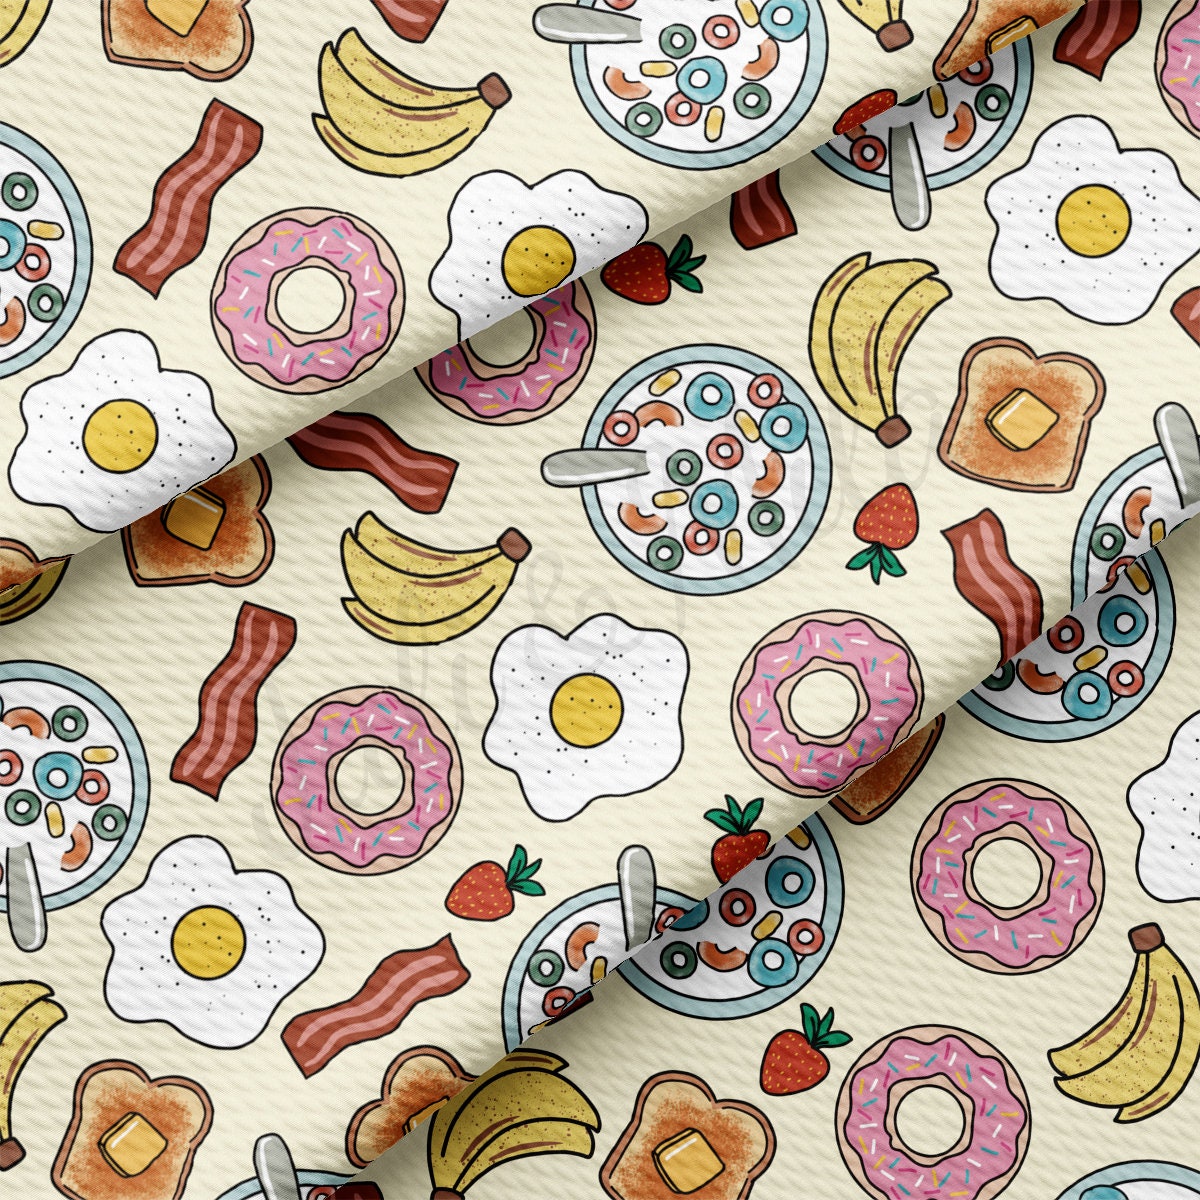 Food Printed Liverpool Bullet Textured Fabric by the yard 4Way Stretch Solid Strip Thick Knit Liverpool Fabric AA2084